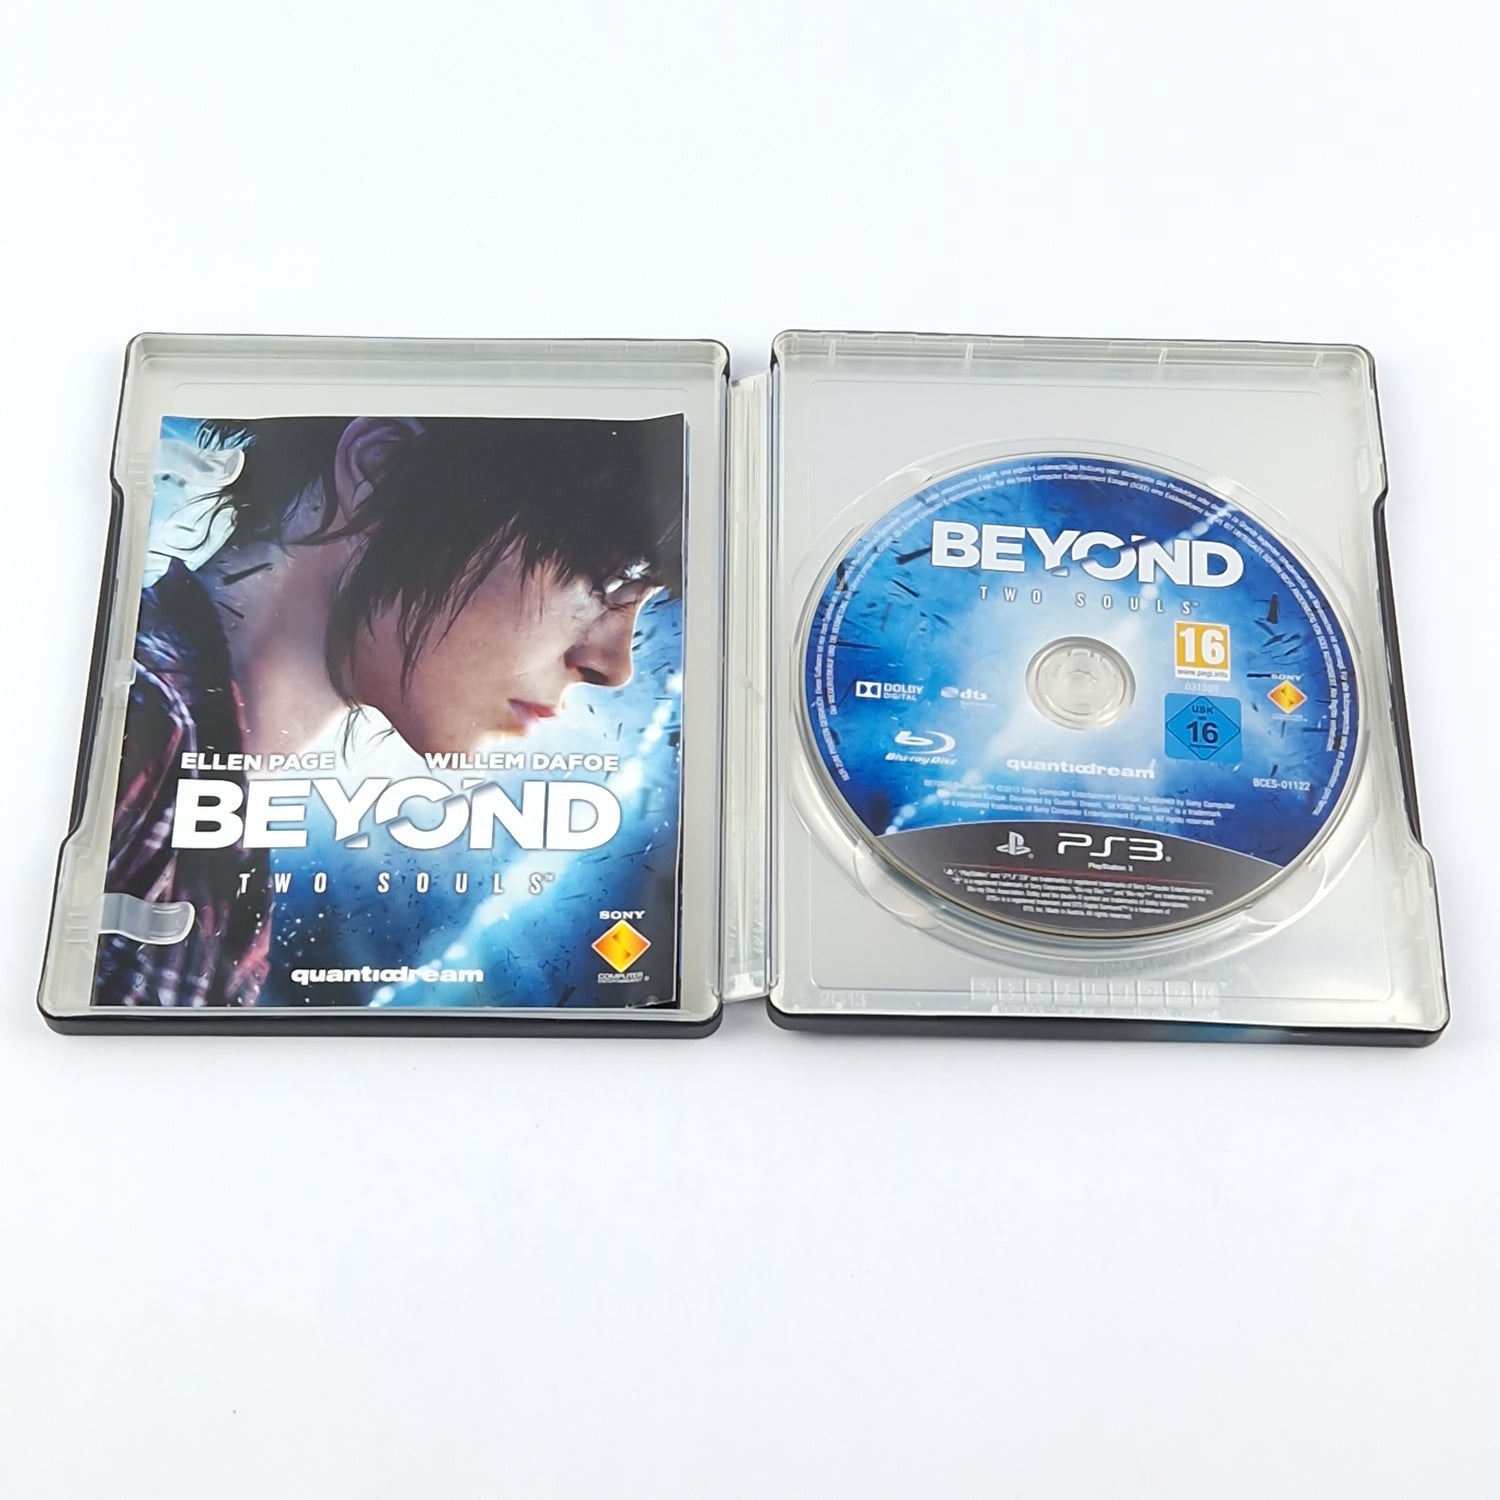 Playstation 3 game: Beyond Two Souls Special Edition - OVP SONY PS3